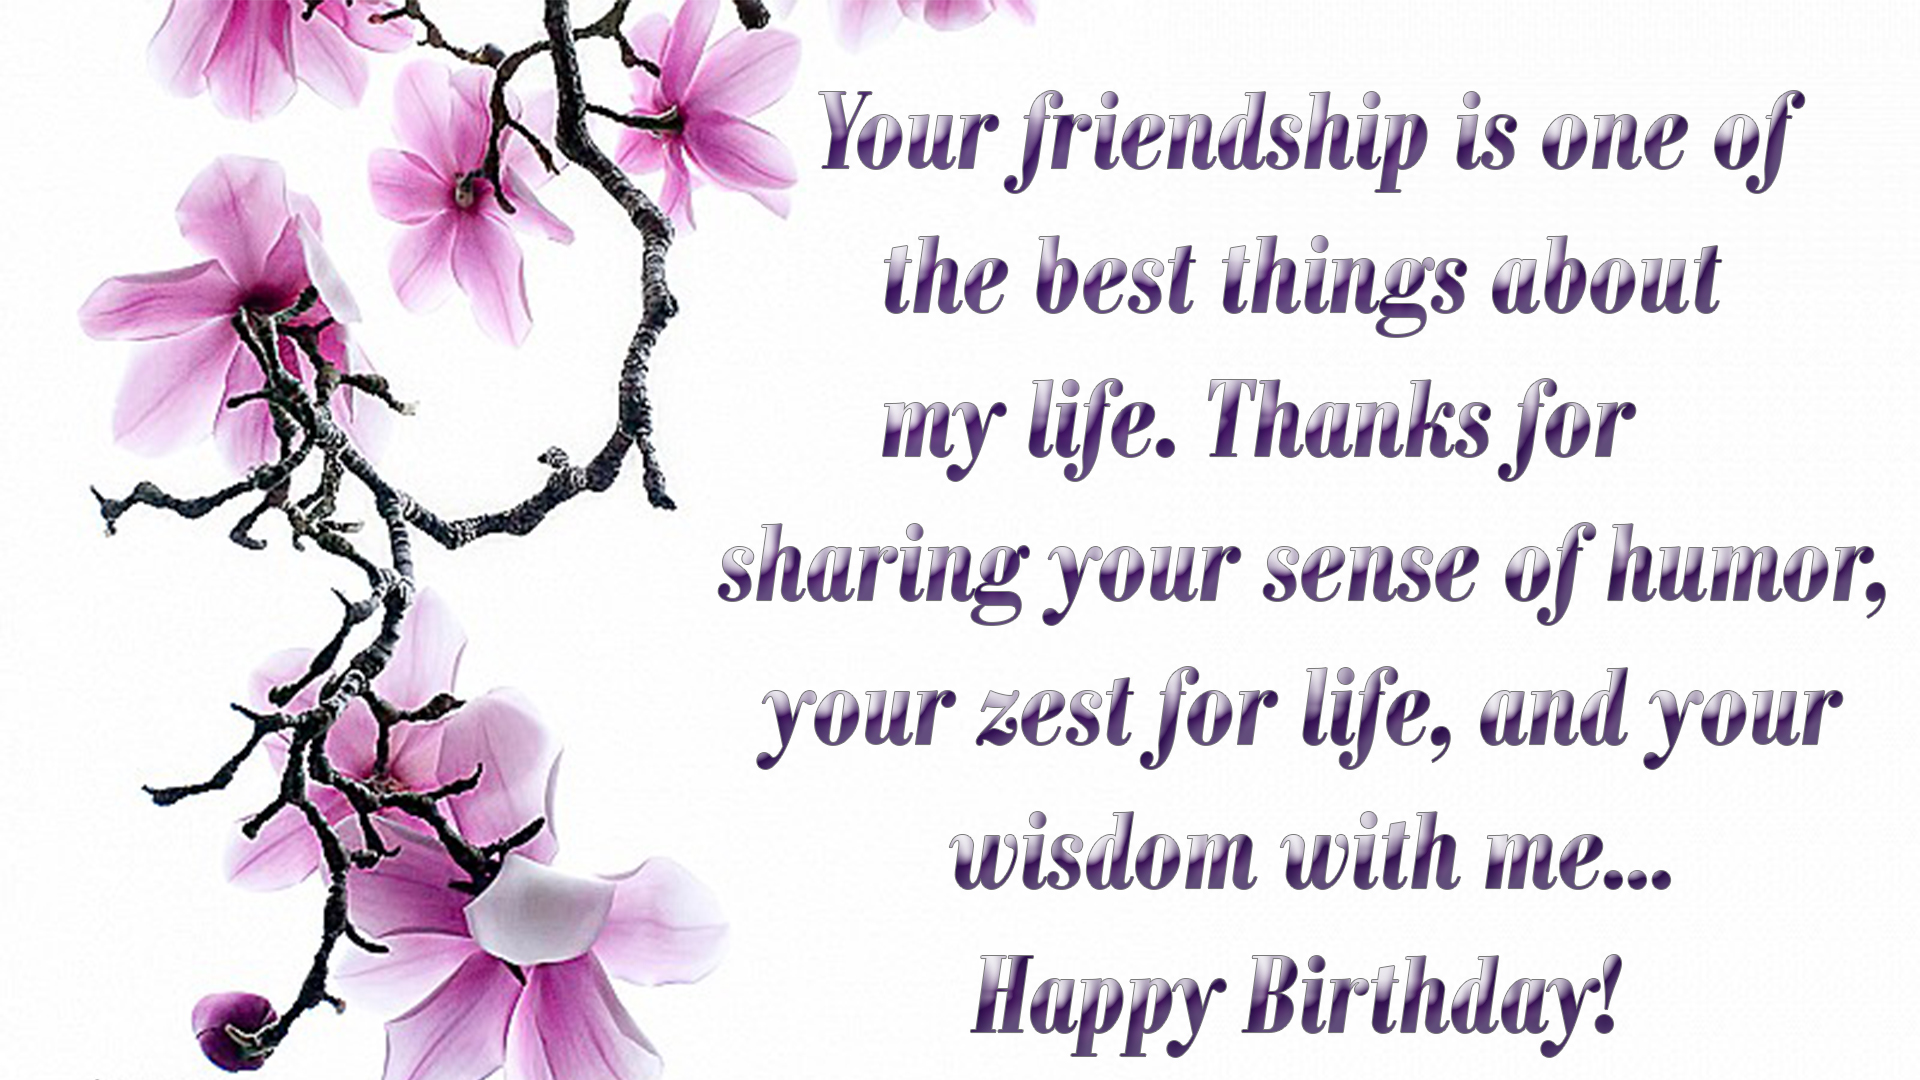 Happy Birthday Quotes & Messages With Images